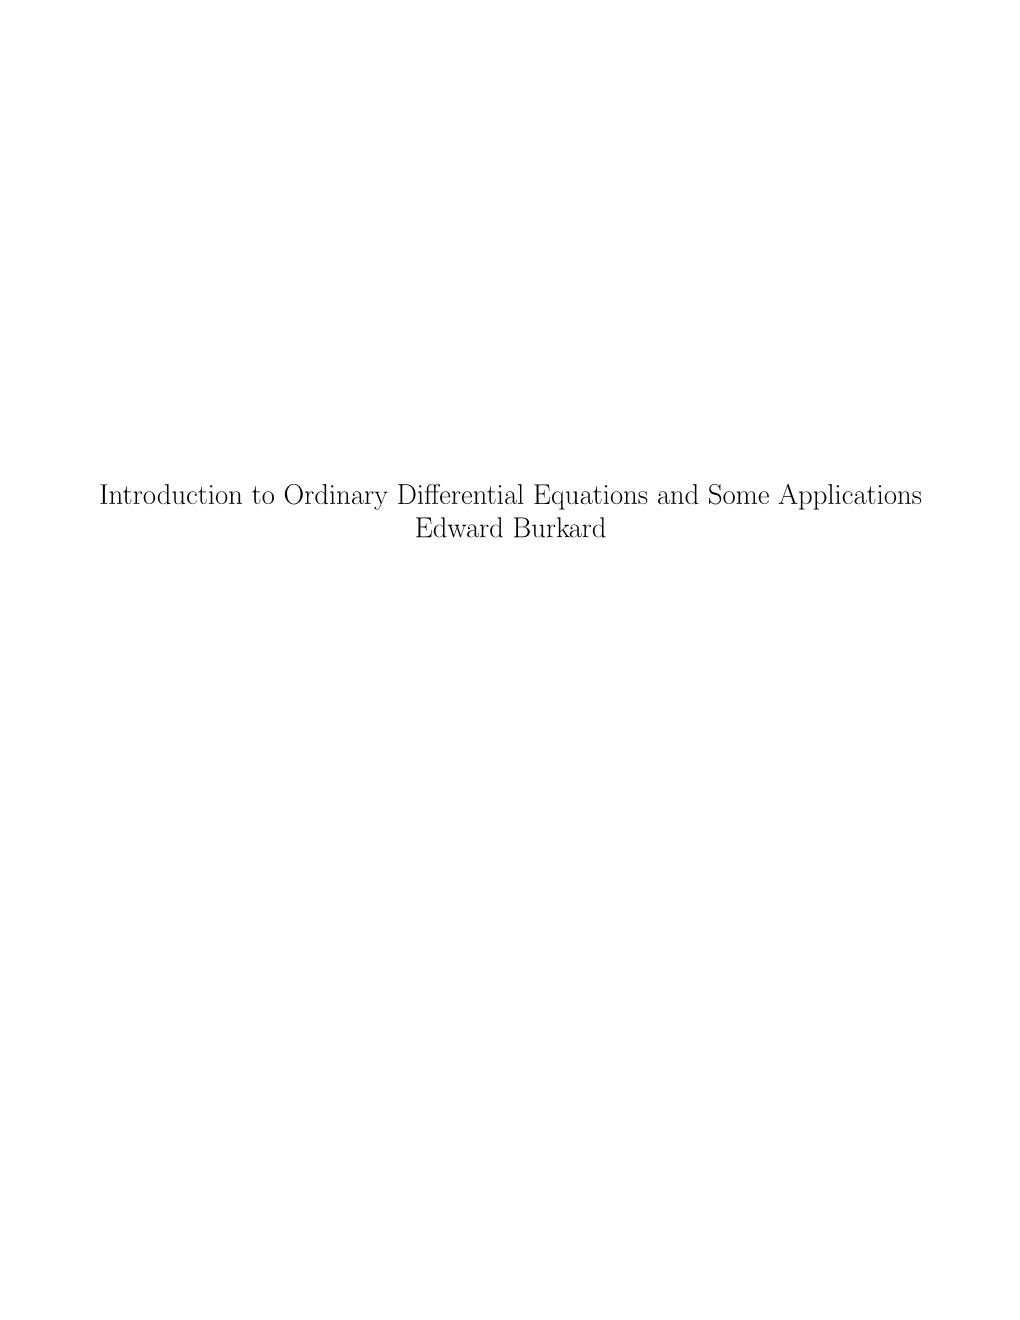 Introduction to Ordinary Differential Equations and Some Applications